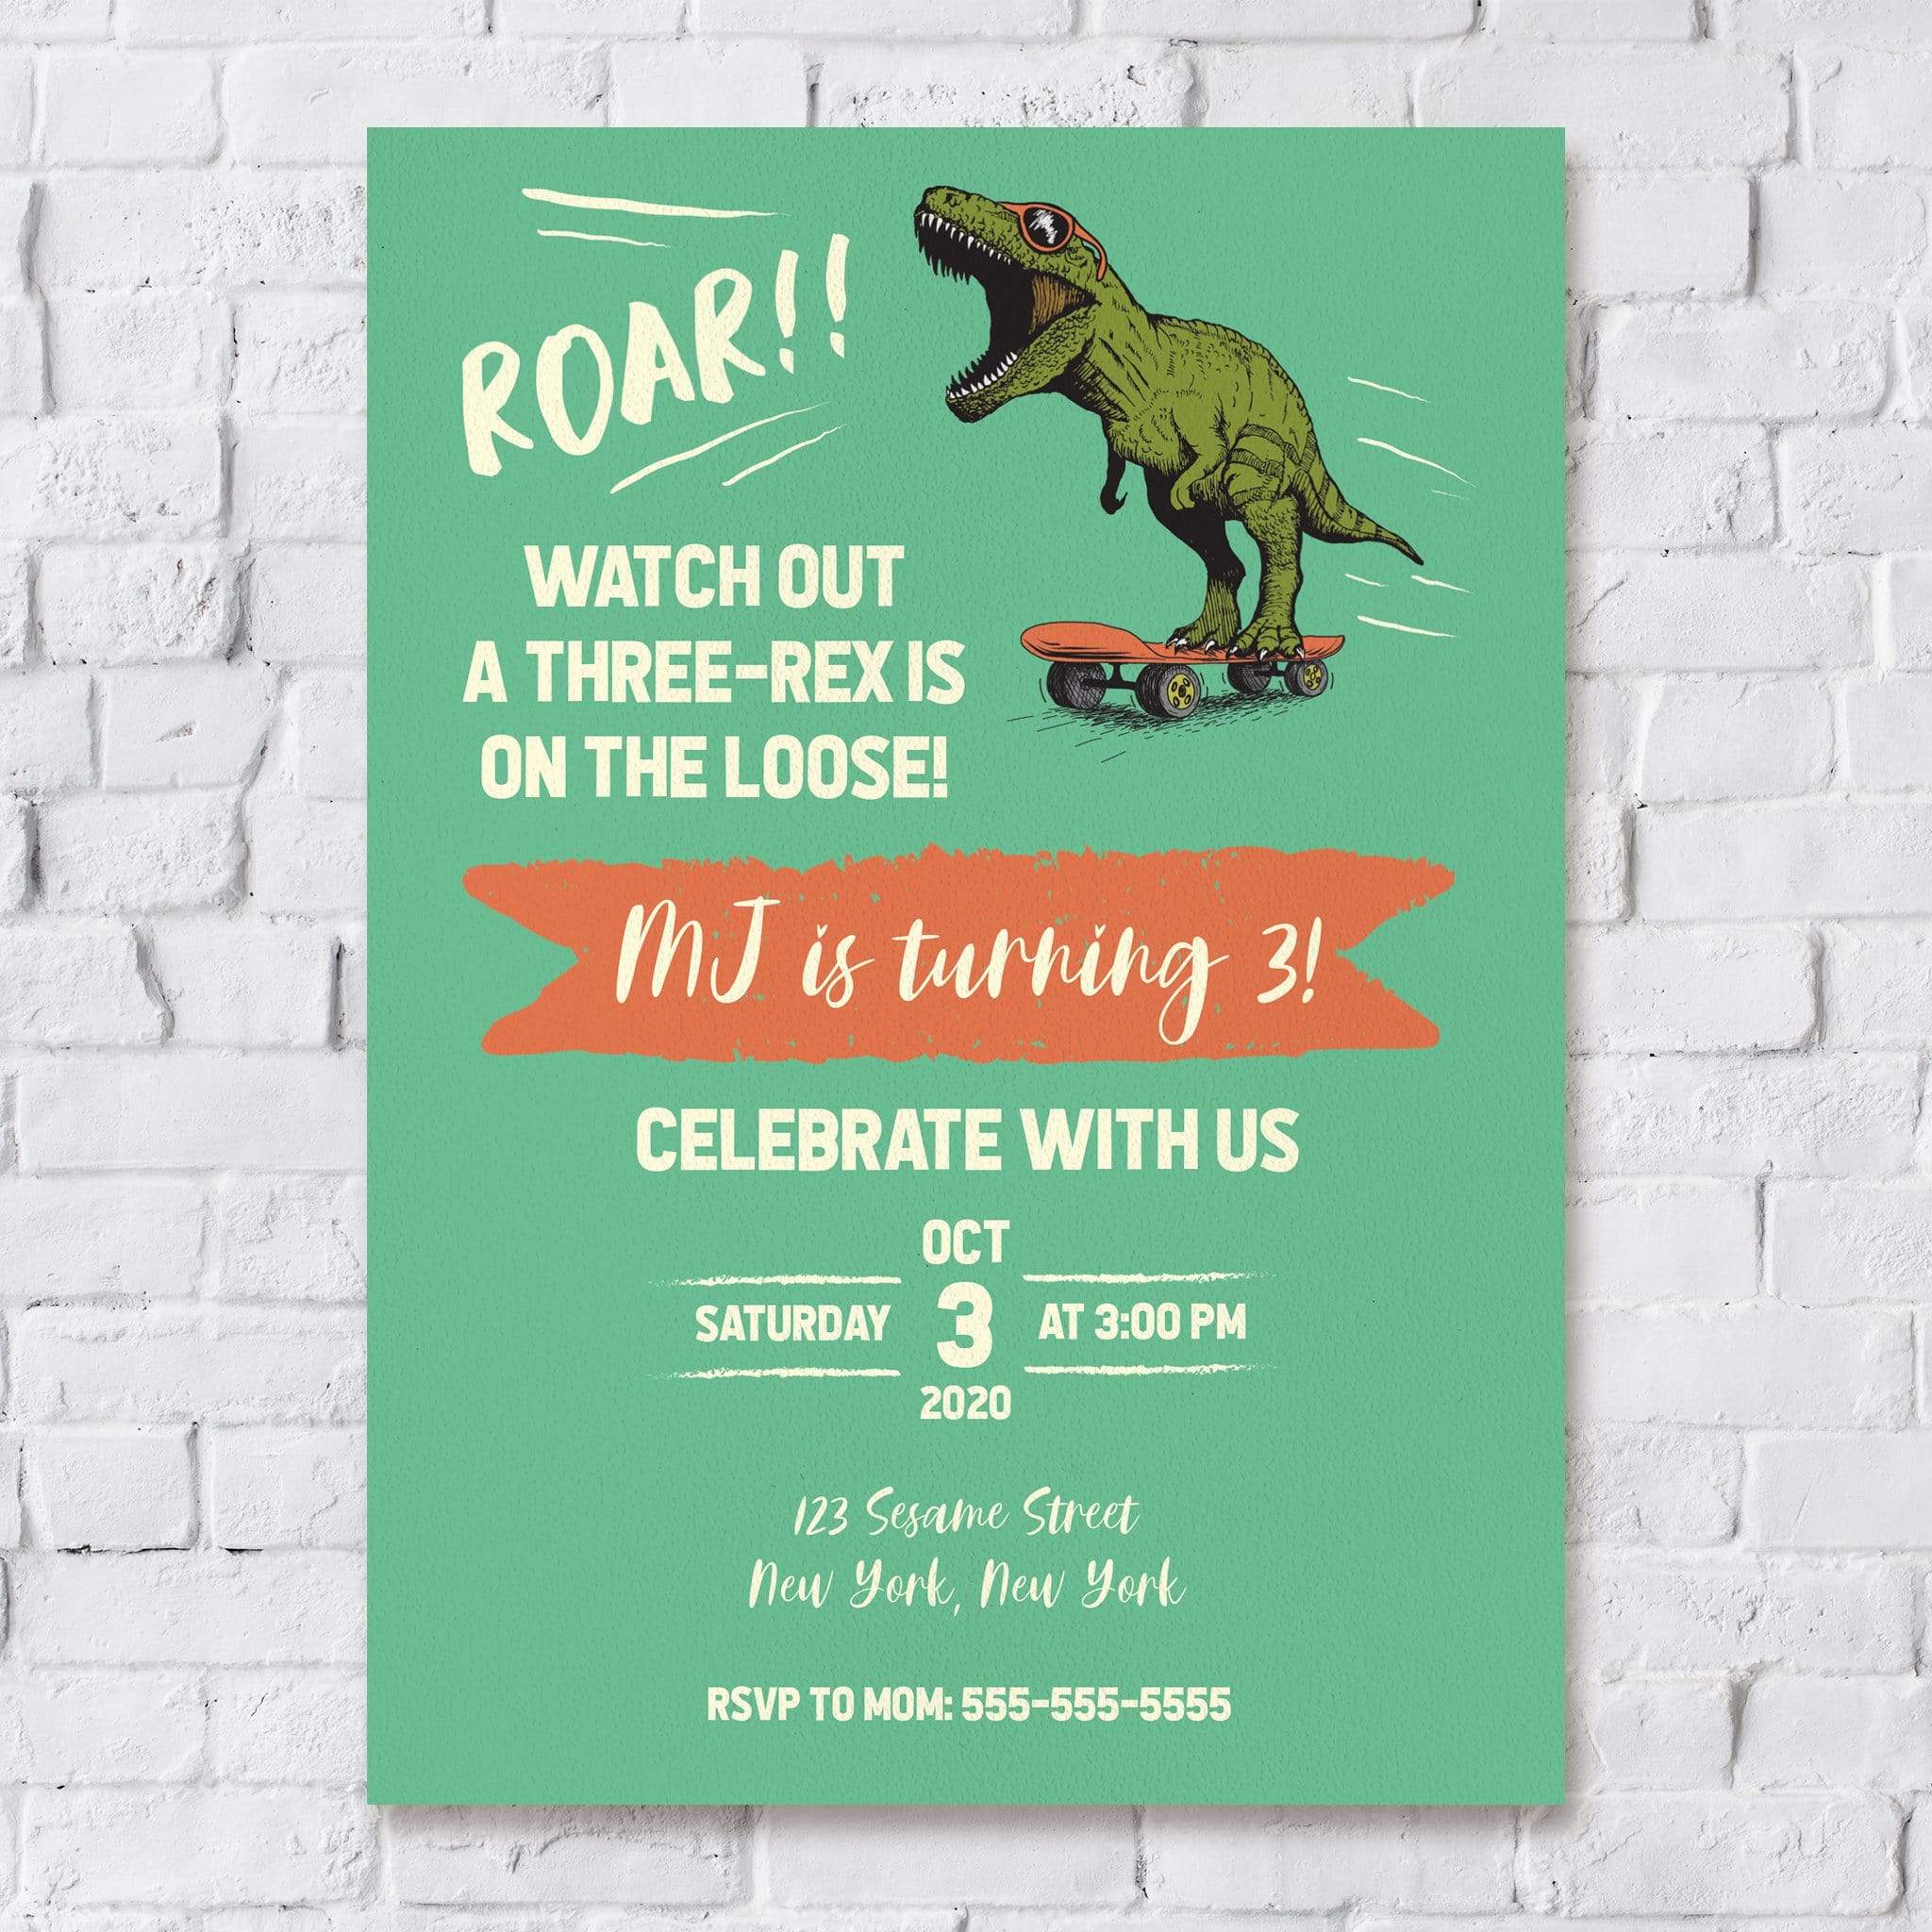 T-Rex On The Loose Poster Print